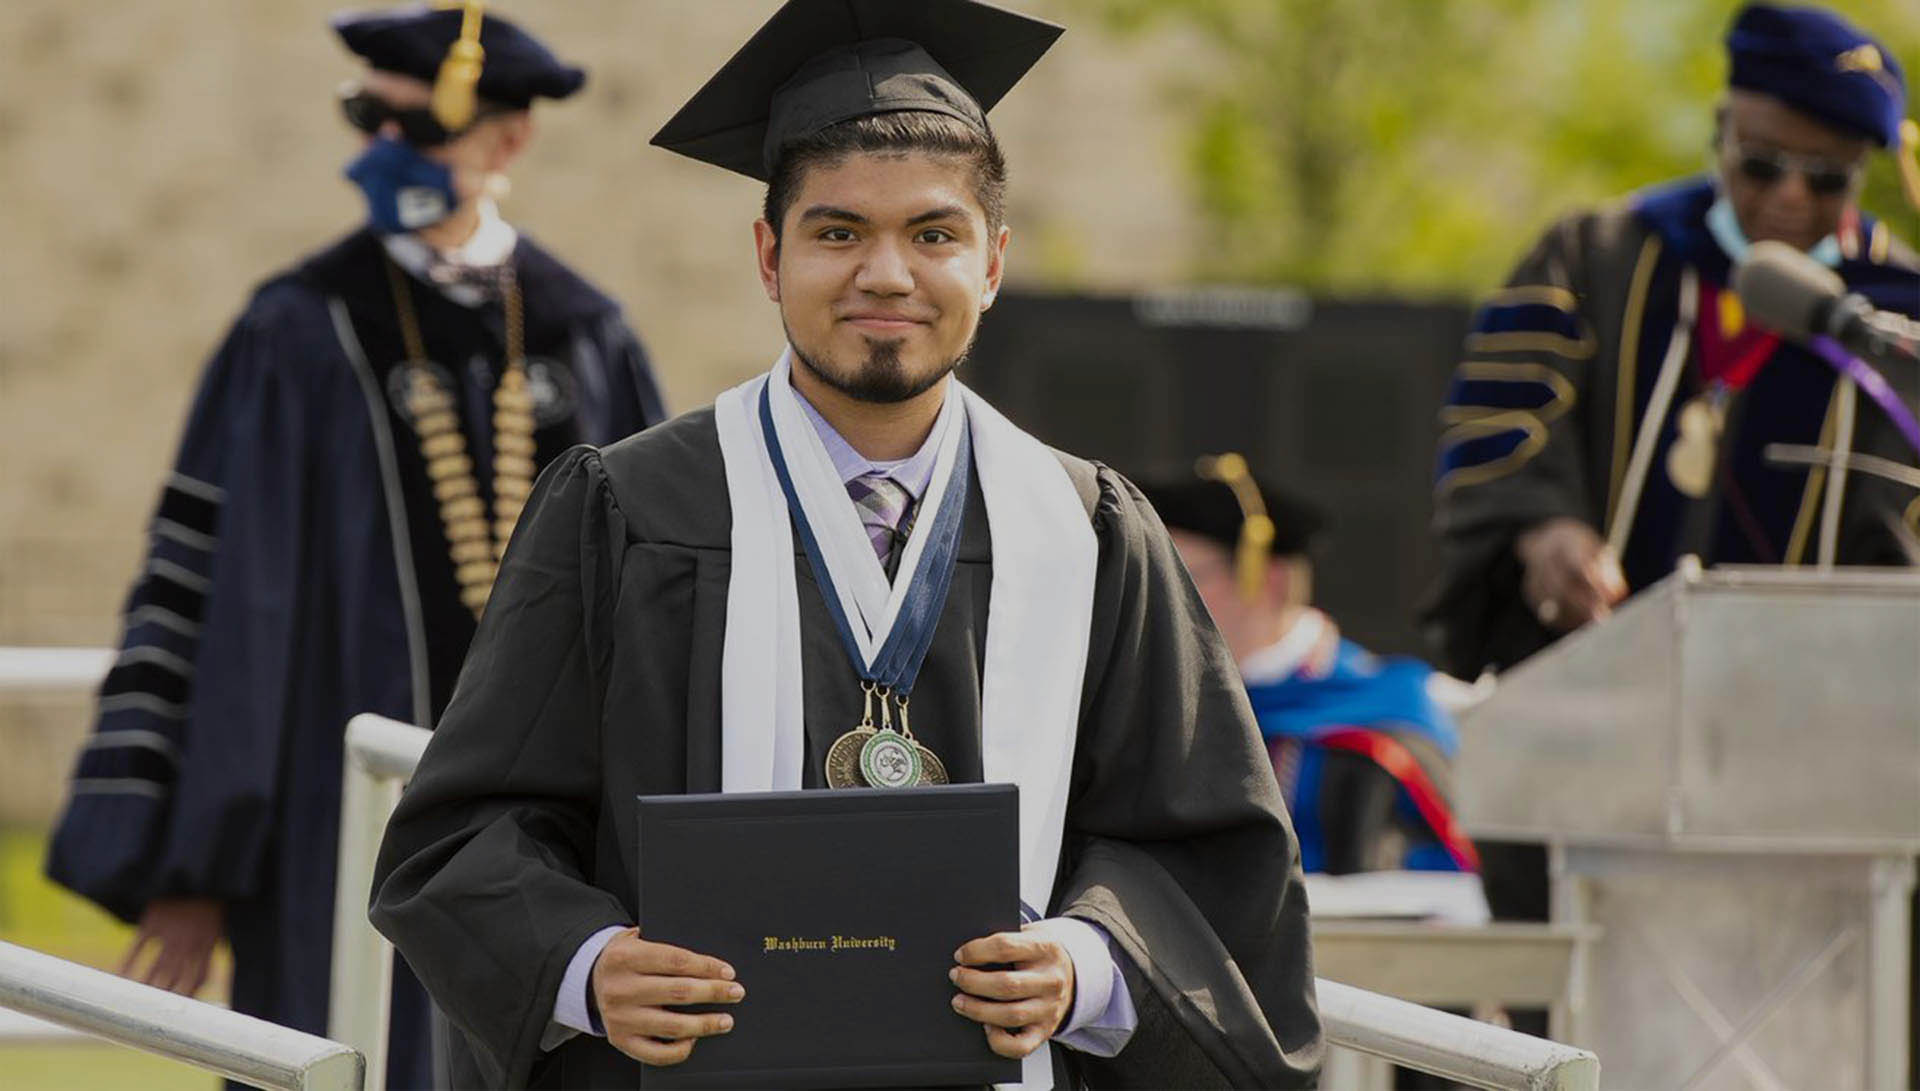 male student at commencement holding diploma